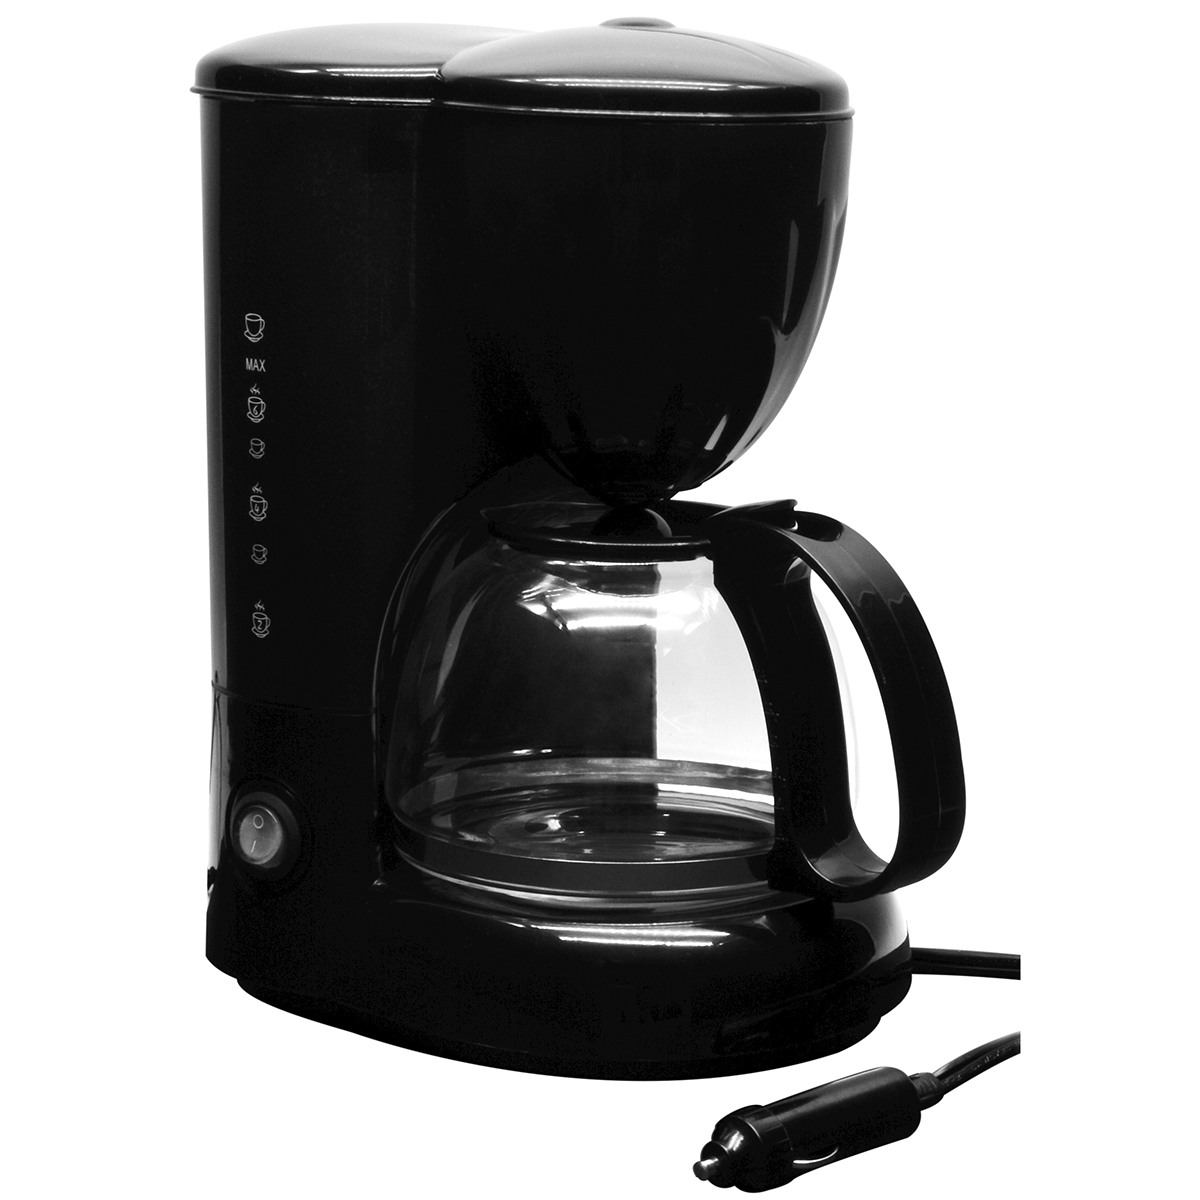 RoadPro 12-Volt Coffee Maker with 20oz. Glass Carafe